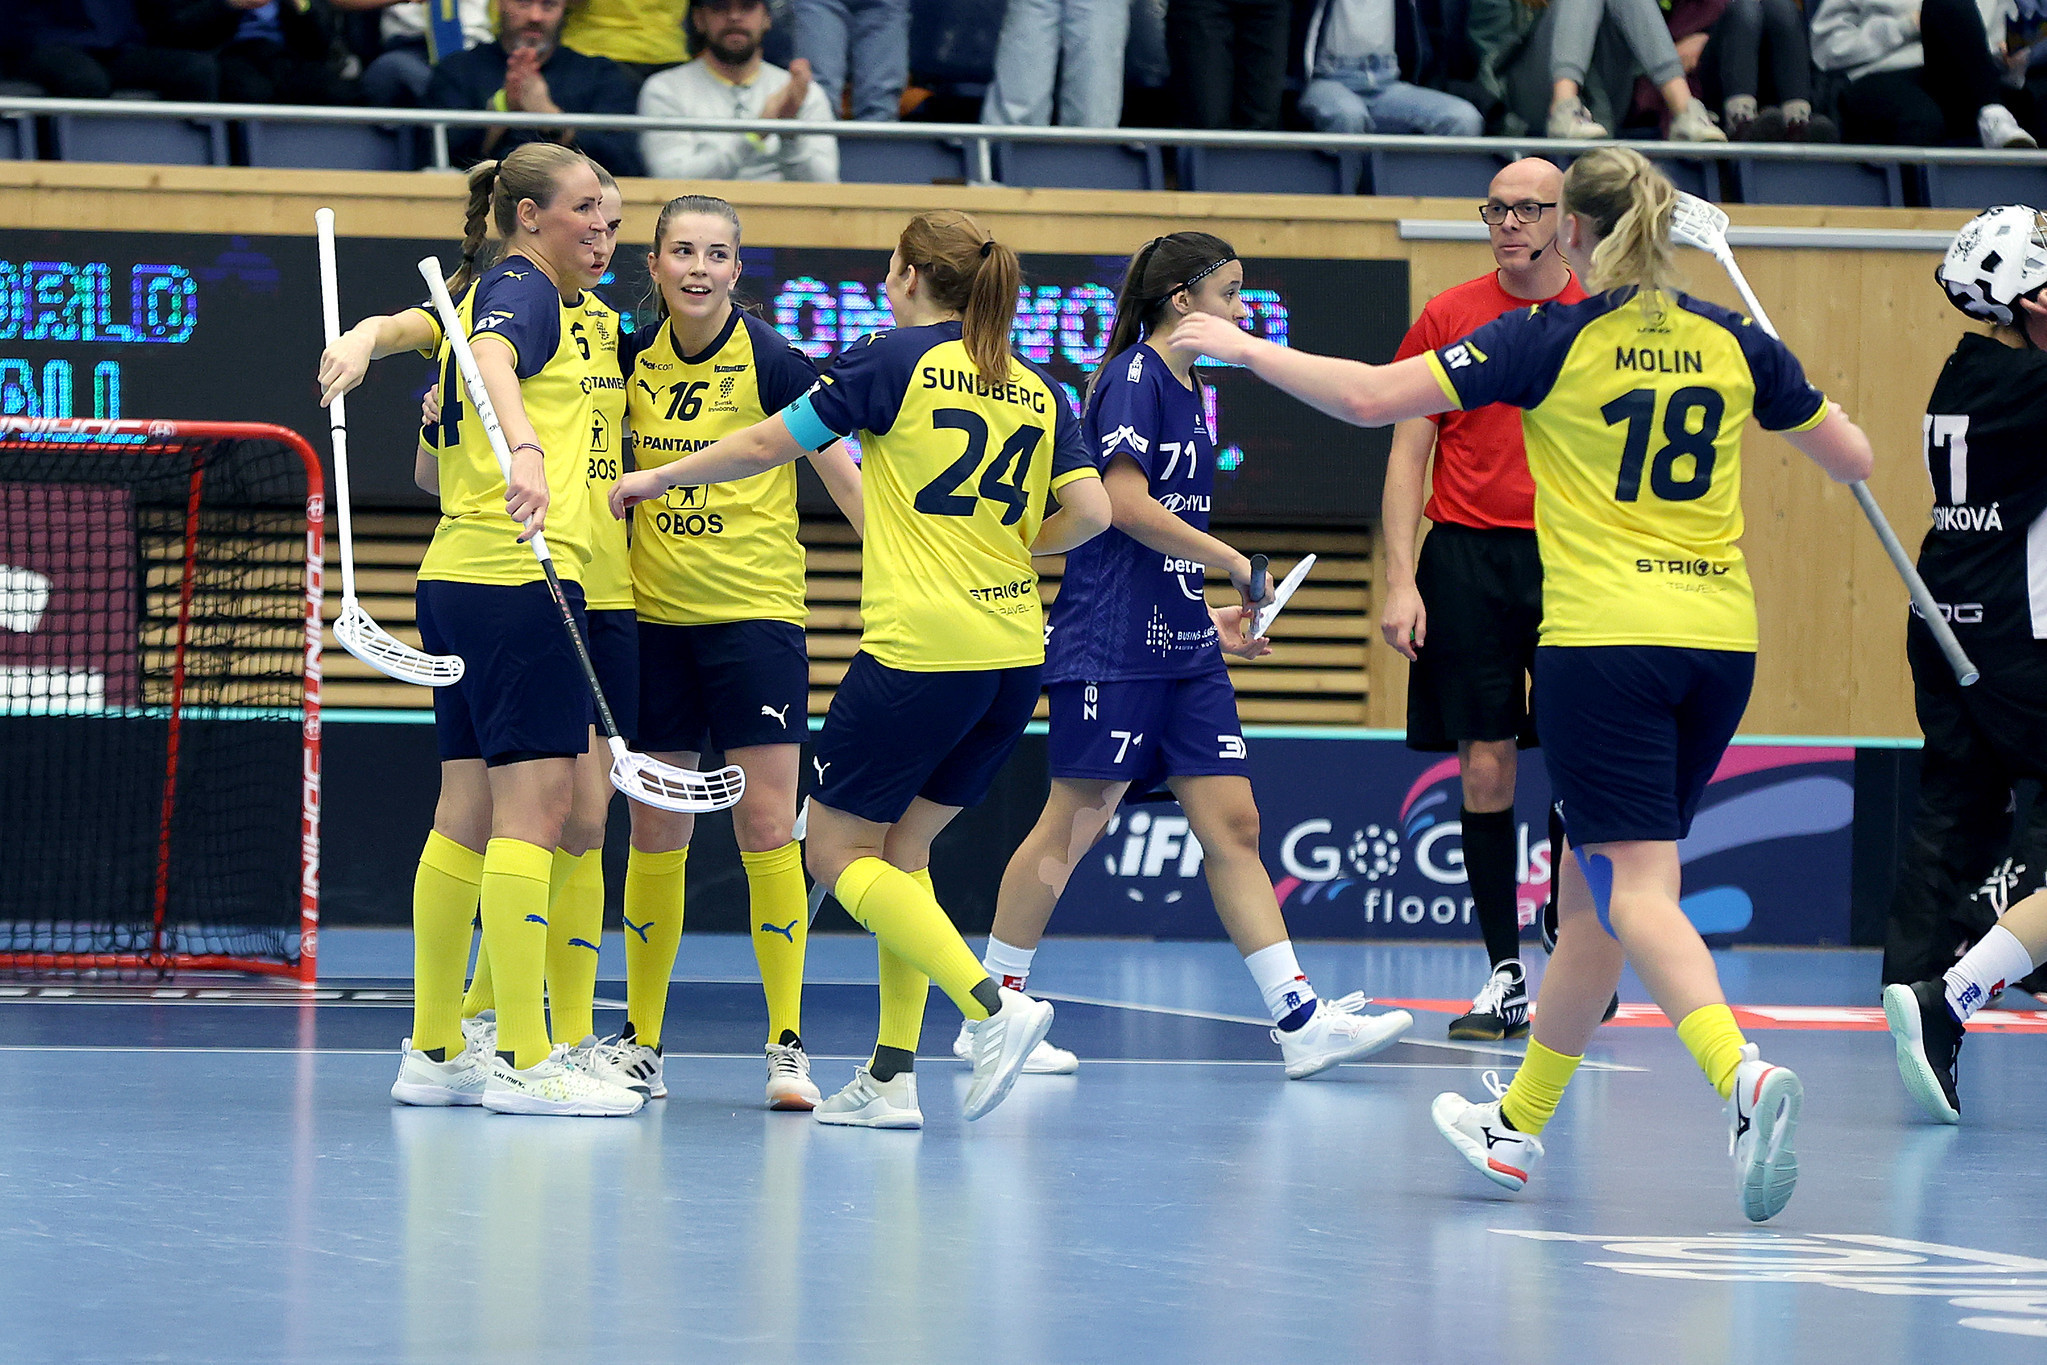 Sweden scored 22 goals in a ruthless display on the opening day of the Women's World Floorball Championship 